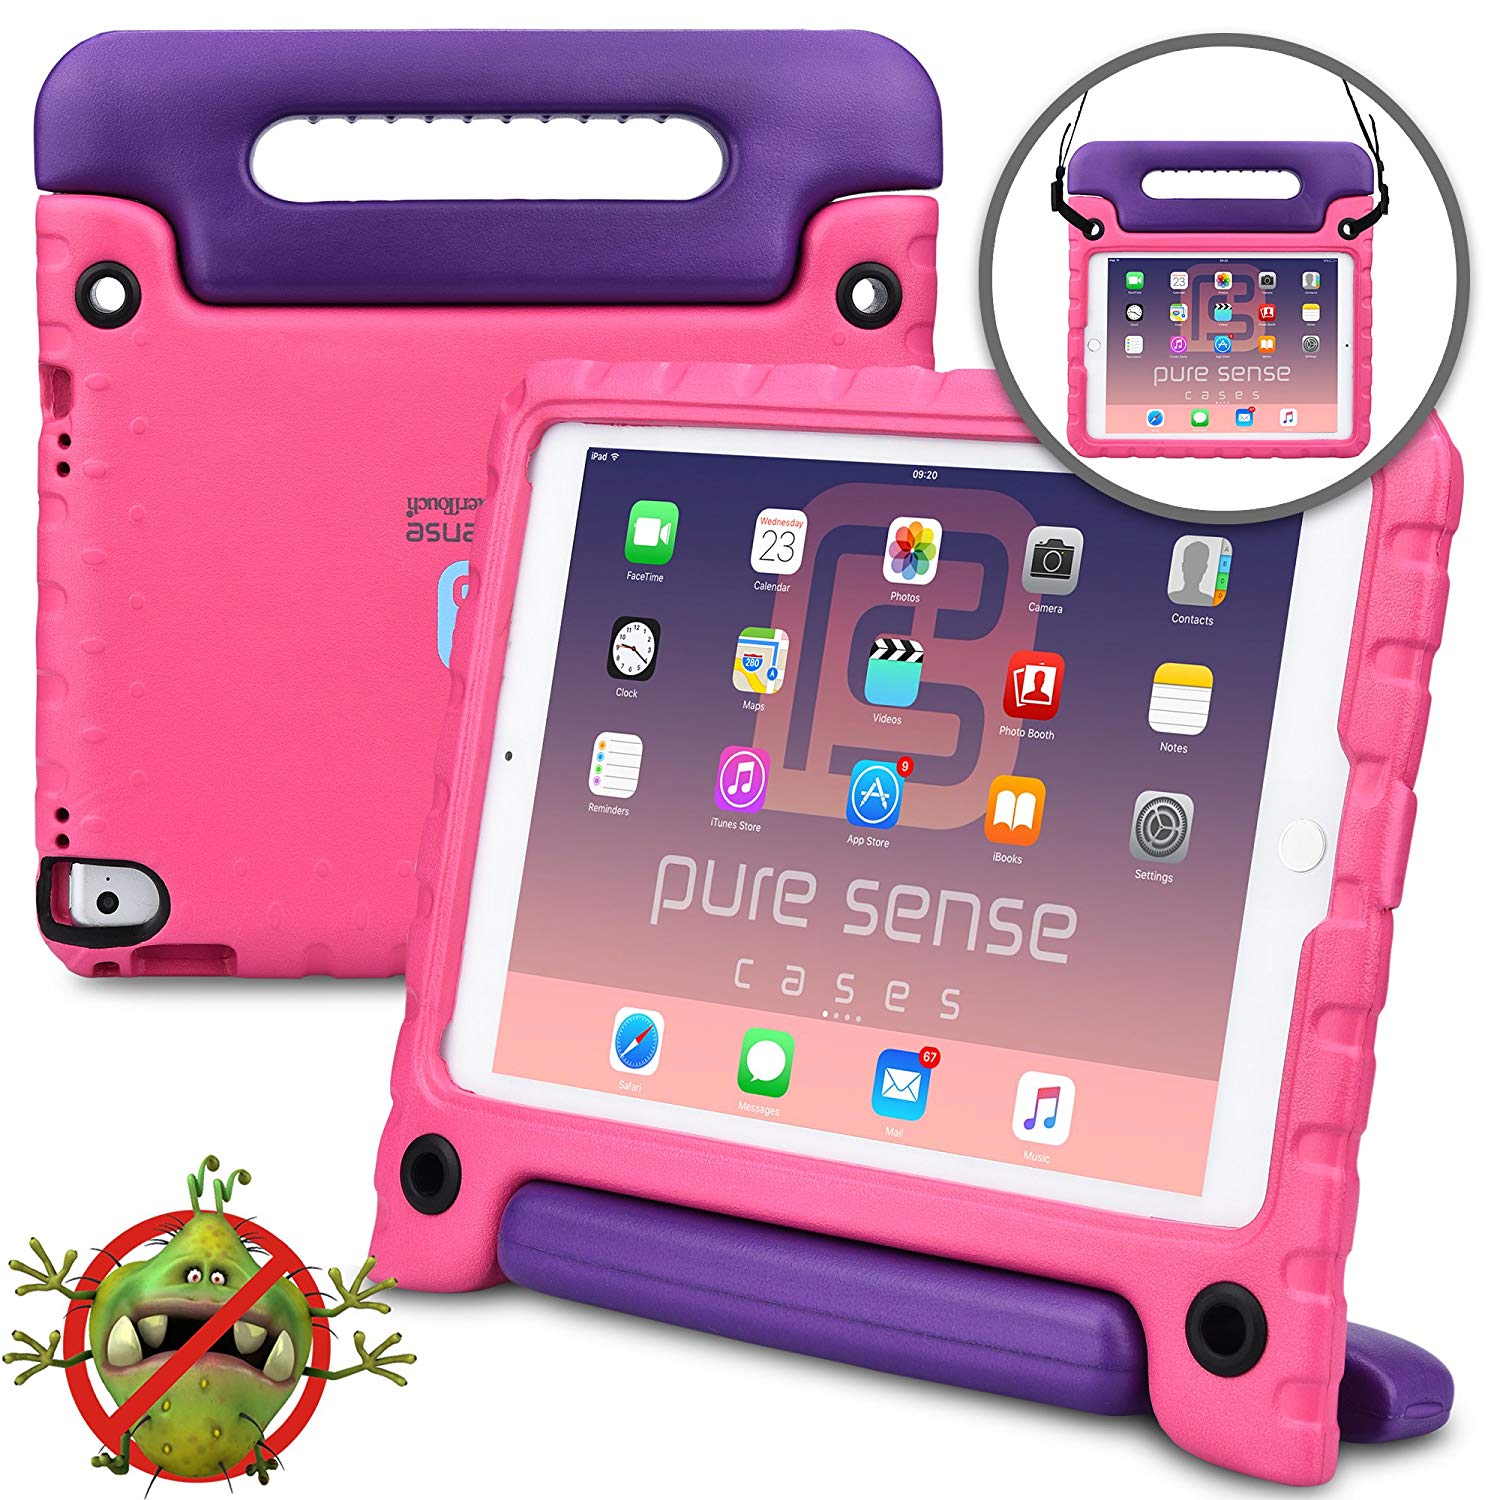 Pure Sense Buddy Kids Case Compatible with iPad Pro 9.7, iPad Air 2 | Anti Microbial Shock Proof Cover for Kids | Boys, Girls | Shoulder Strap, Handle & Stand | Apple A1673 A1674 A1566 A1567